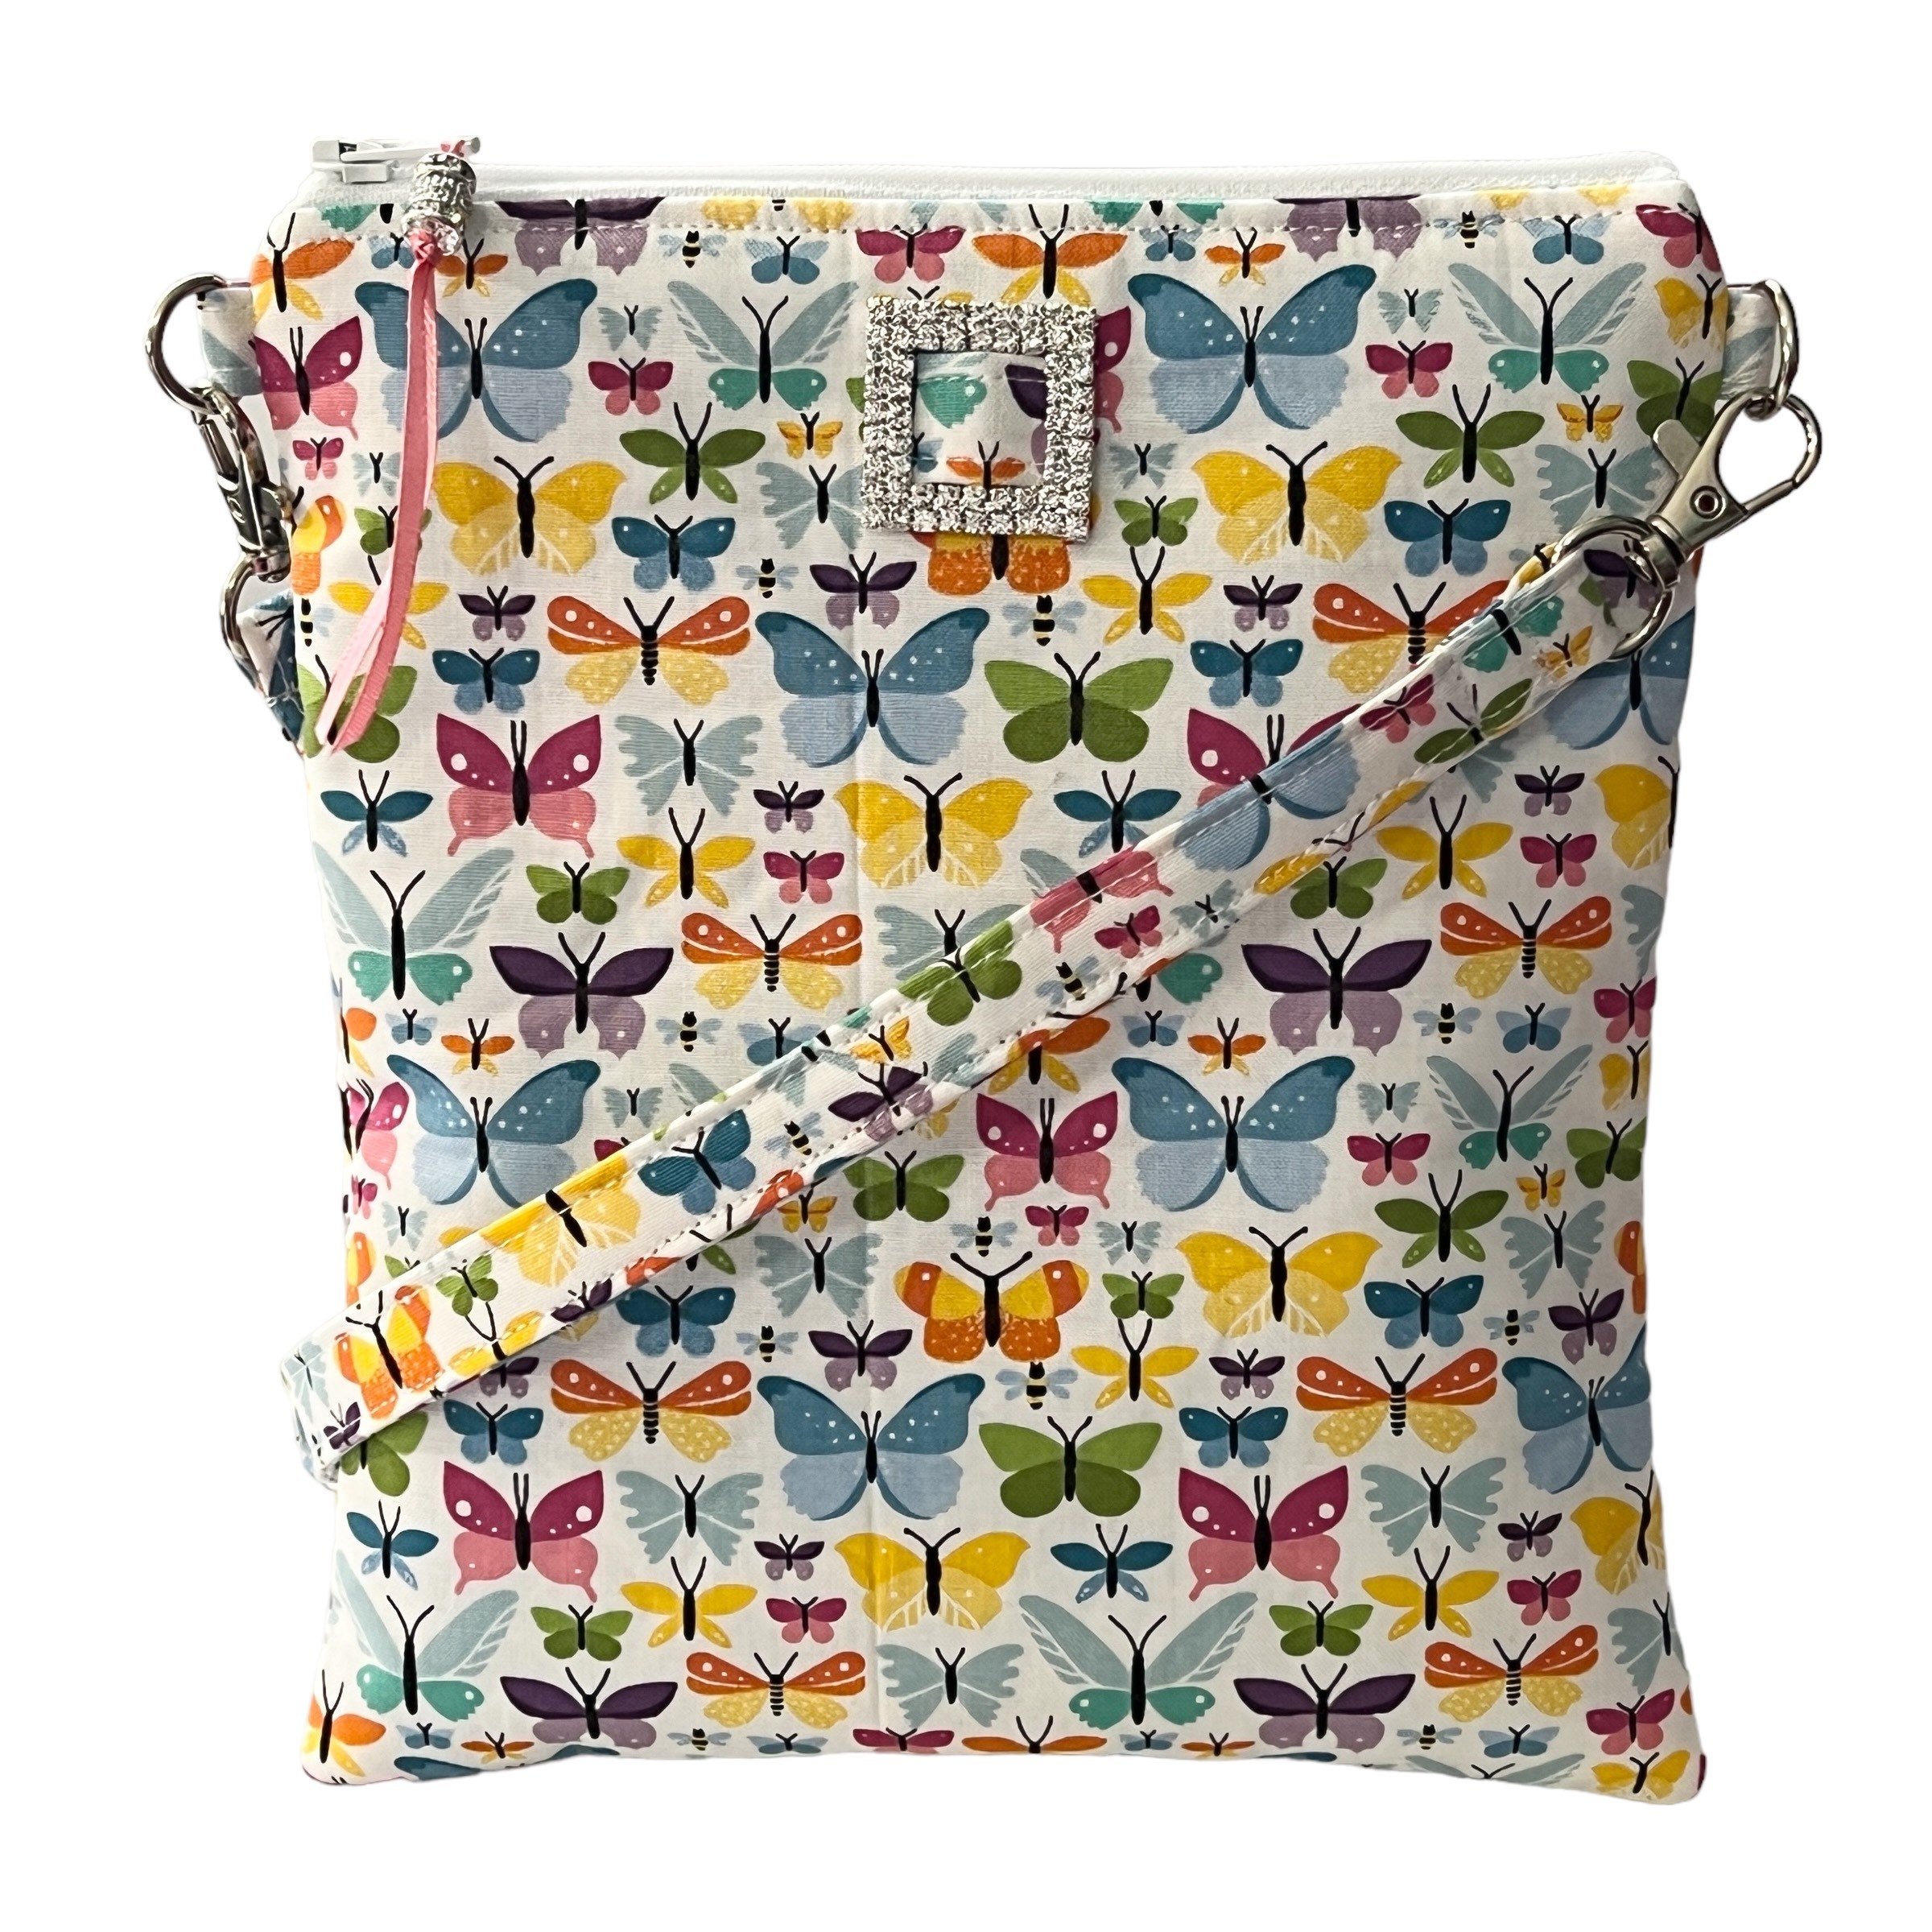 Mini Printed Butterfly Decorated Shell Crossbody Bag With Metal Chain